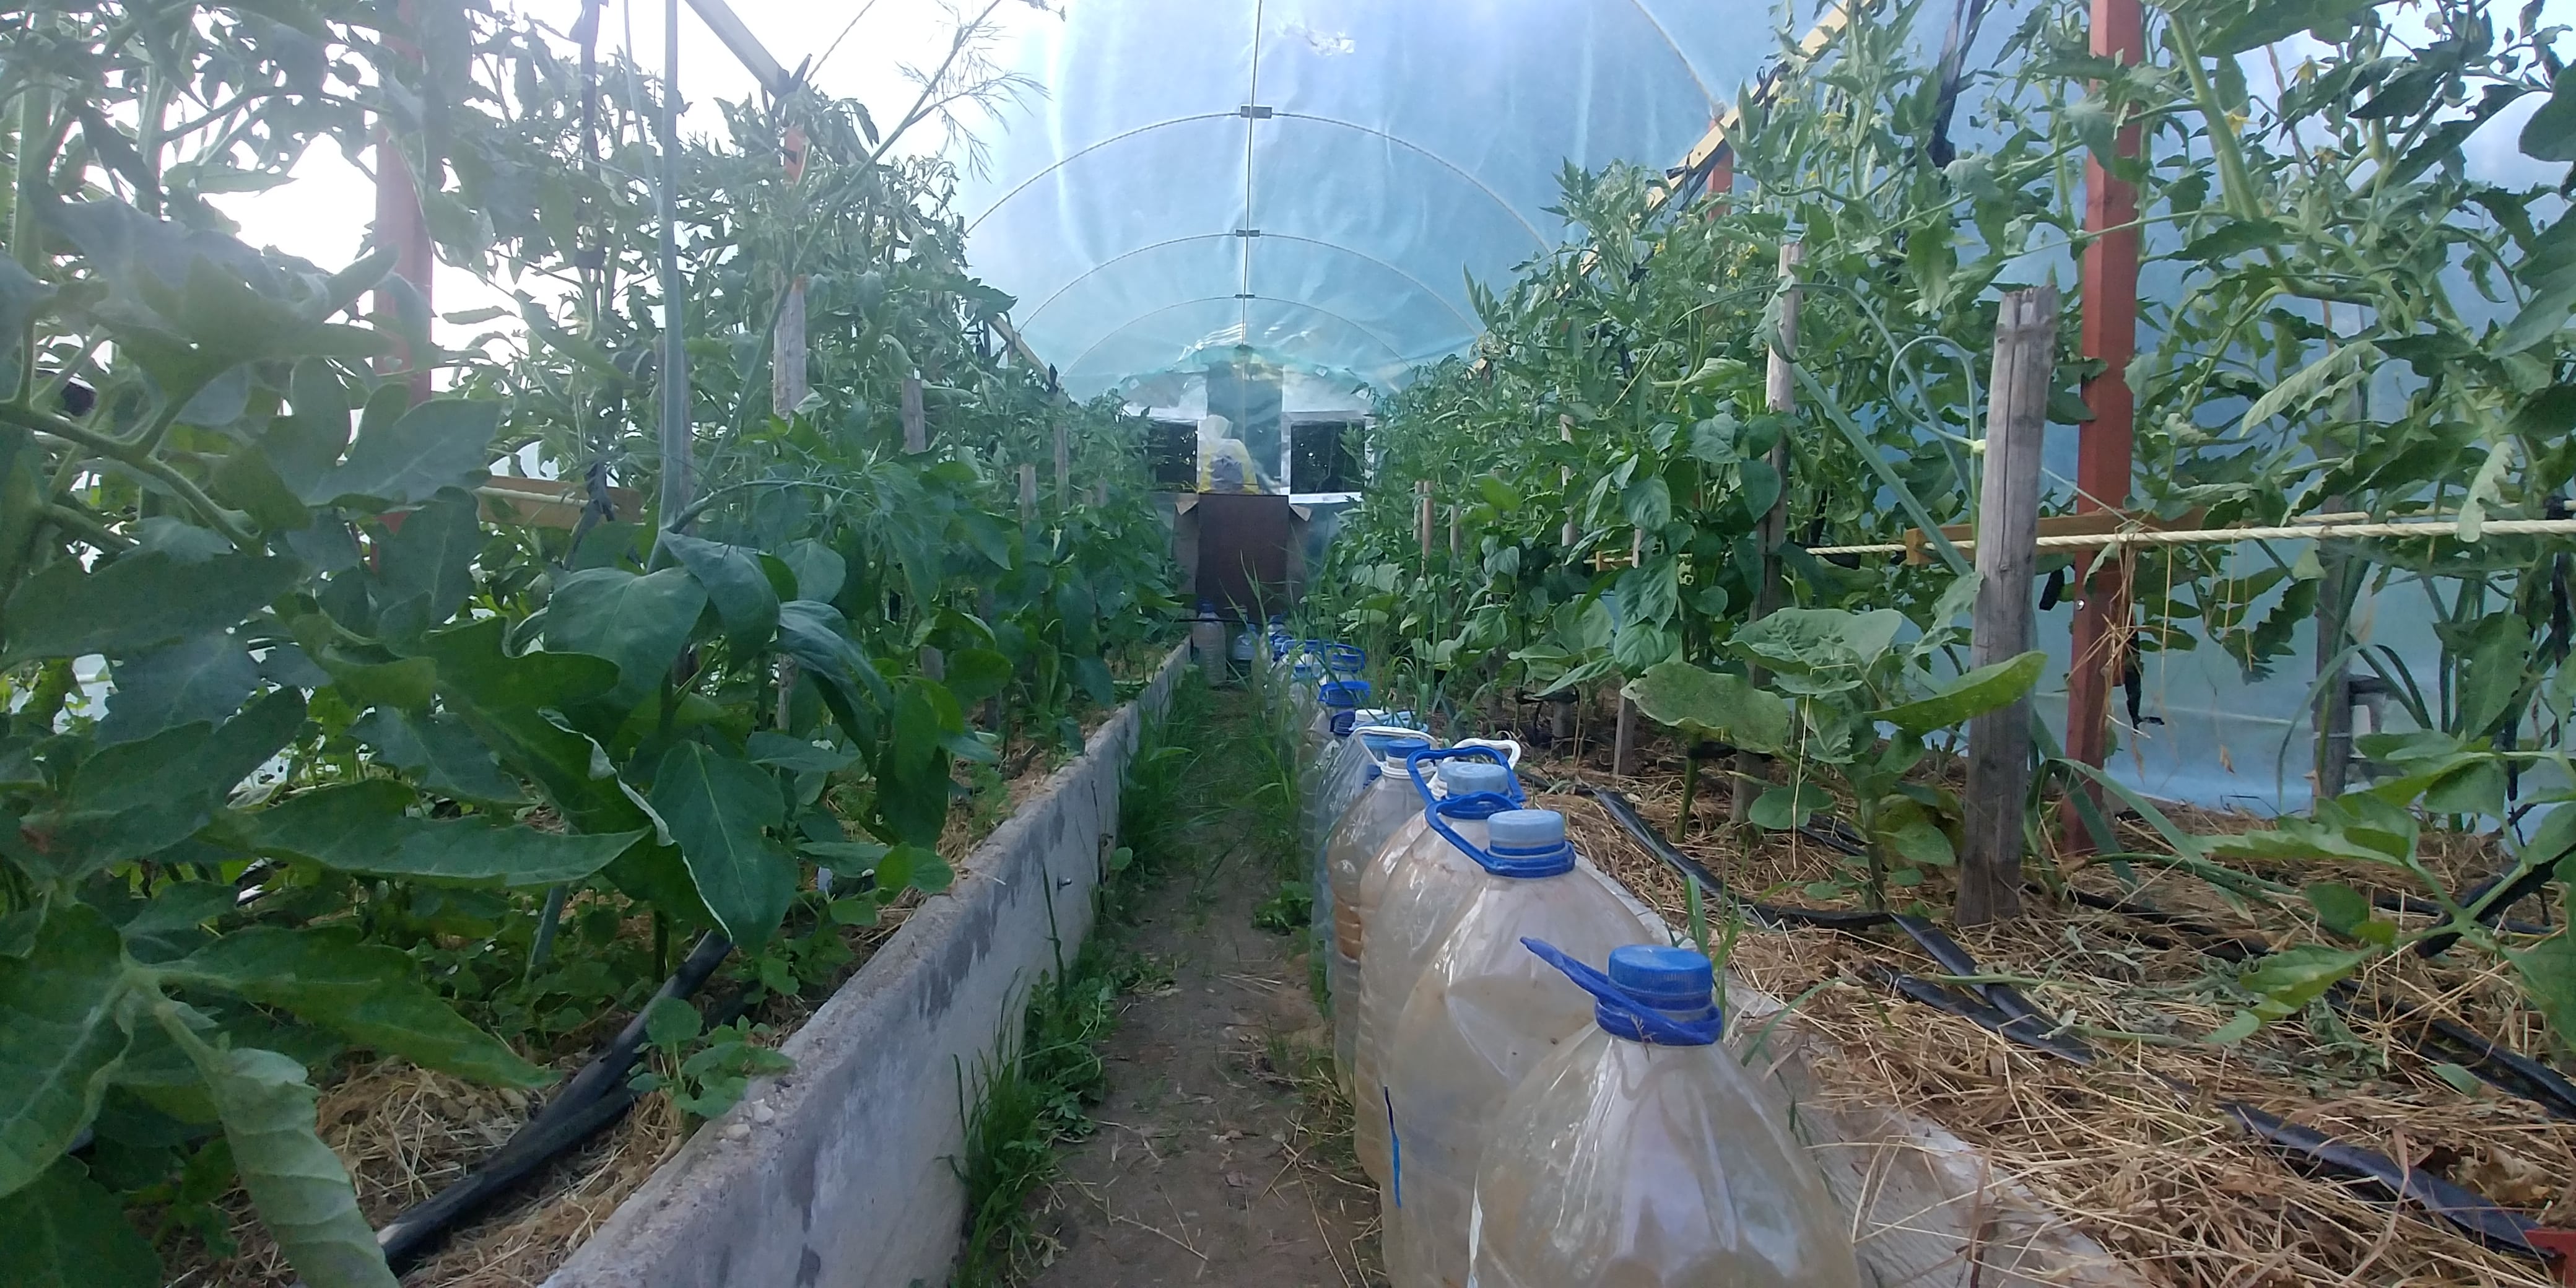 How to care for the garden - Peppers and eggplant in a greenhouse with tomatoes.